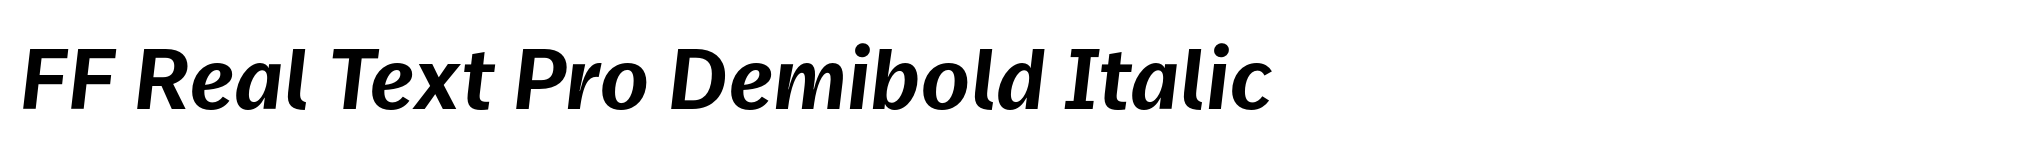 FF Real Text Pro Demibold Italic image